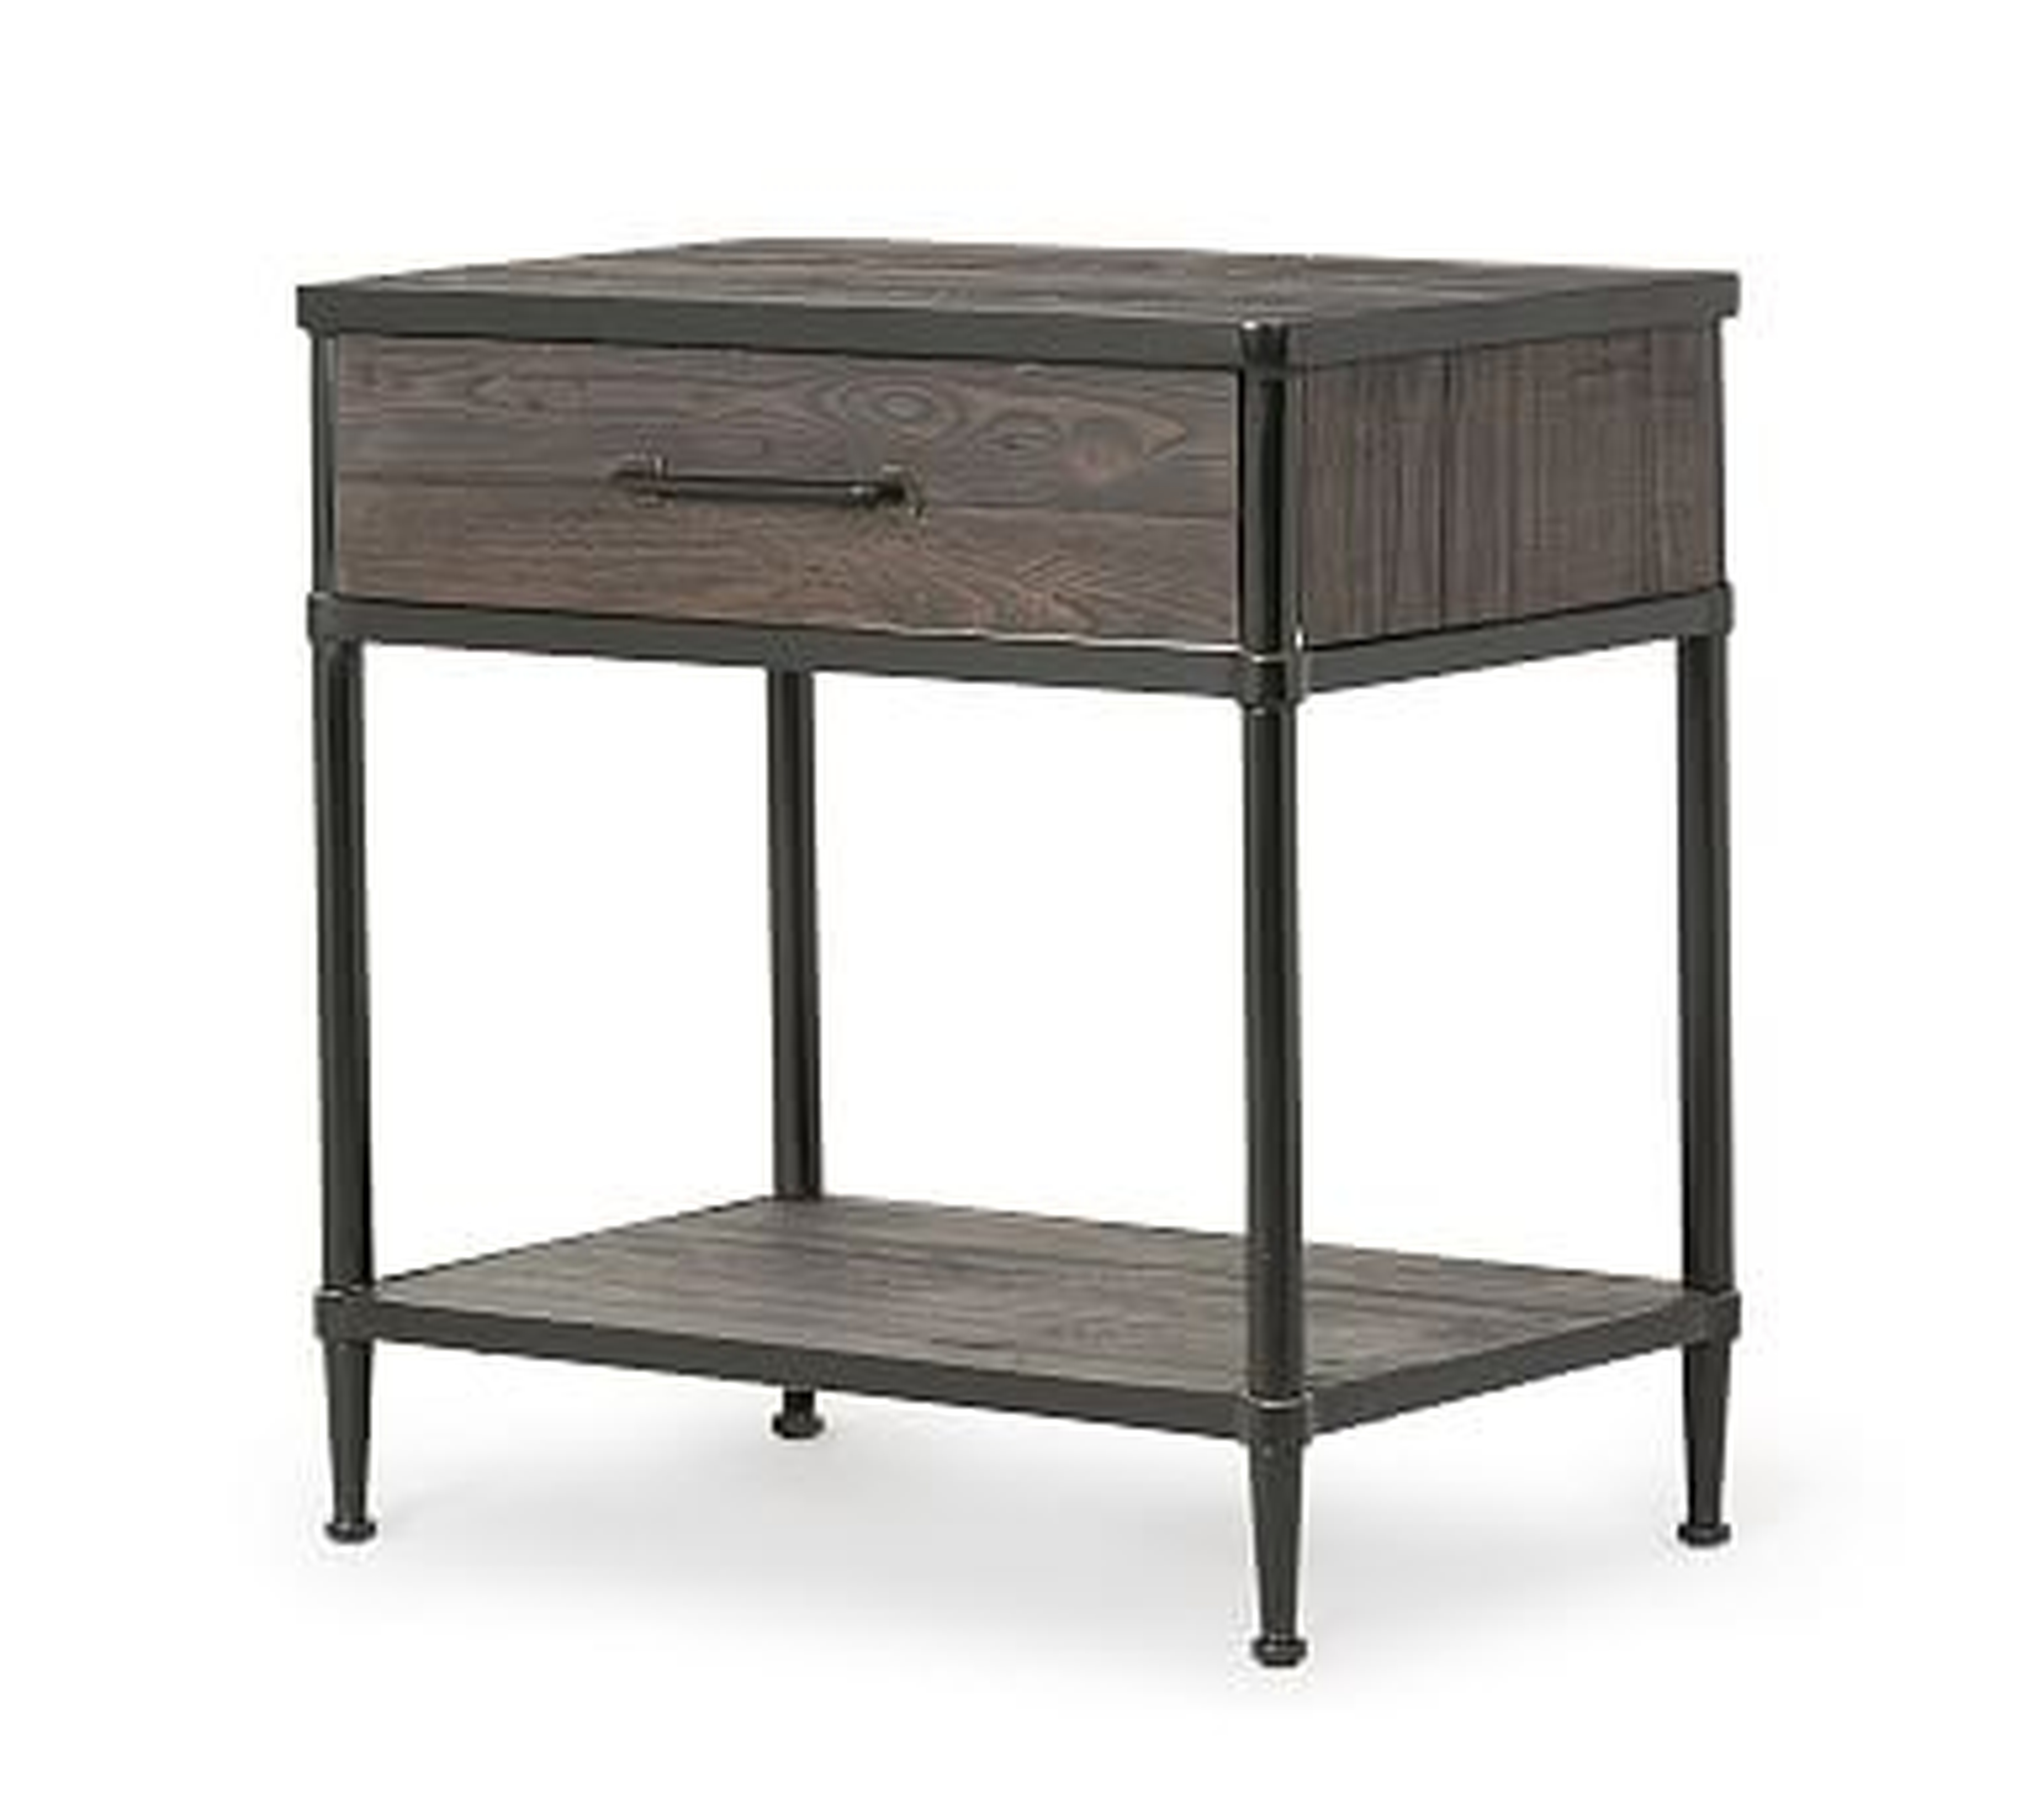 Juno 27" Reclaimed Wood Nightstand, Carbon - Pottery Barn